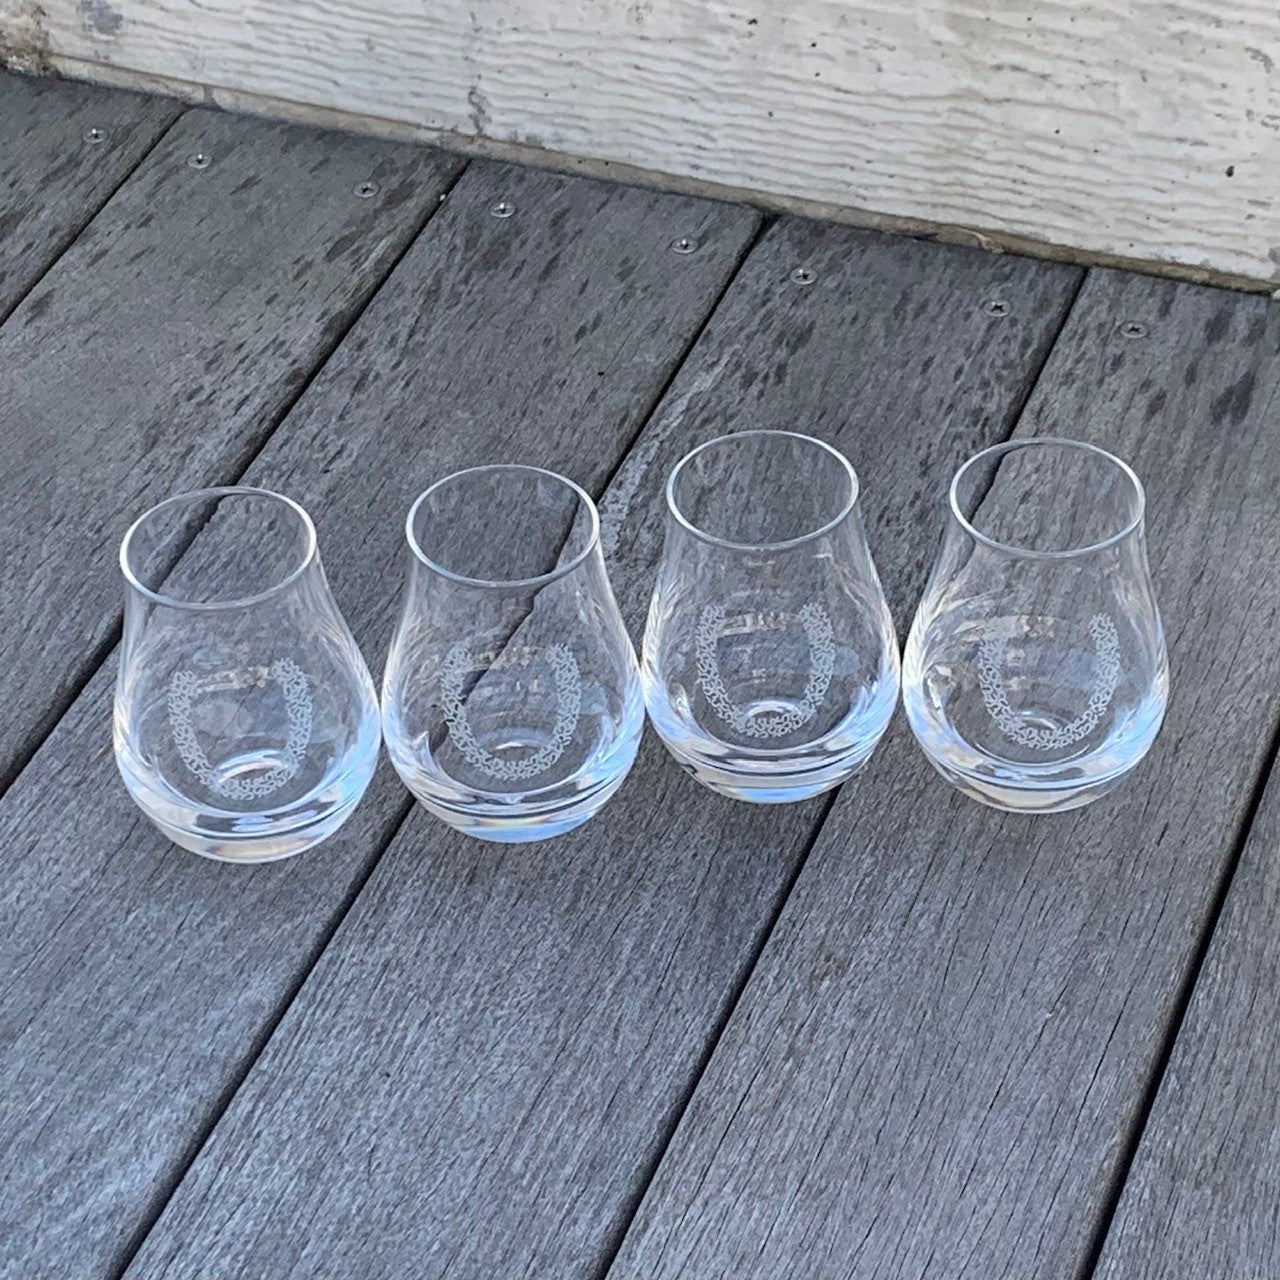 Horseshoe Le Decant Decanter and matching shot glasses